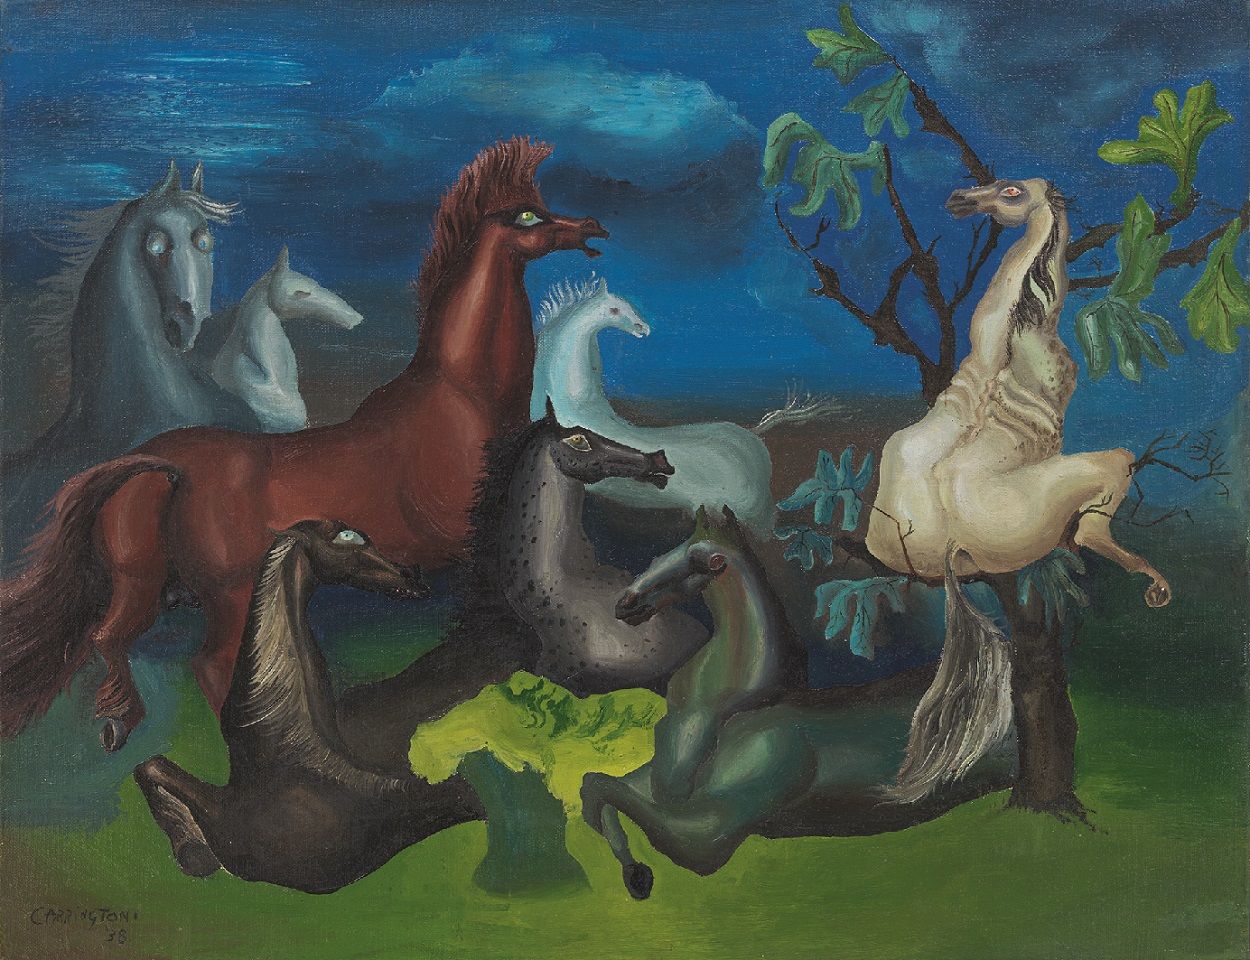 'The Horses of Lord Candlestick', de Leonora Carrington (1938). The 31 Women. © ESTATE OF LEONORA CARRINGTON/VEGAP, MADRID, 2023